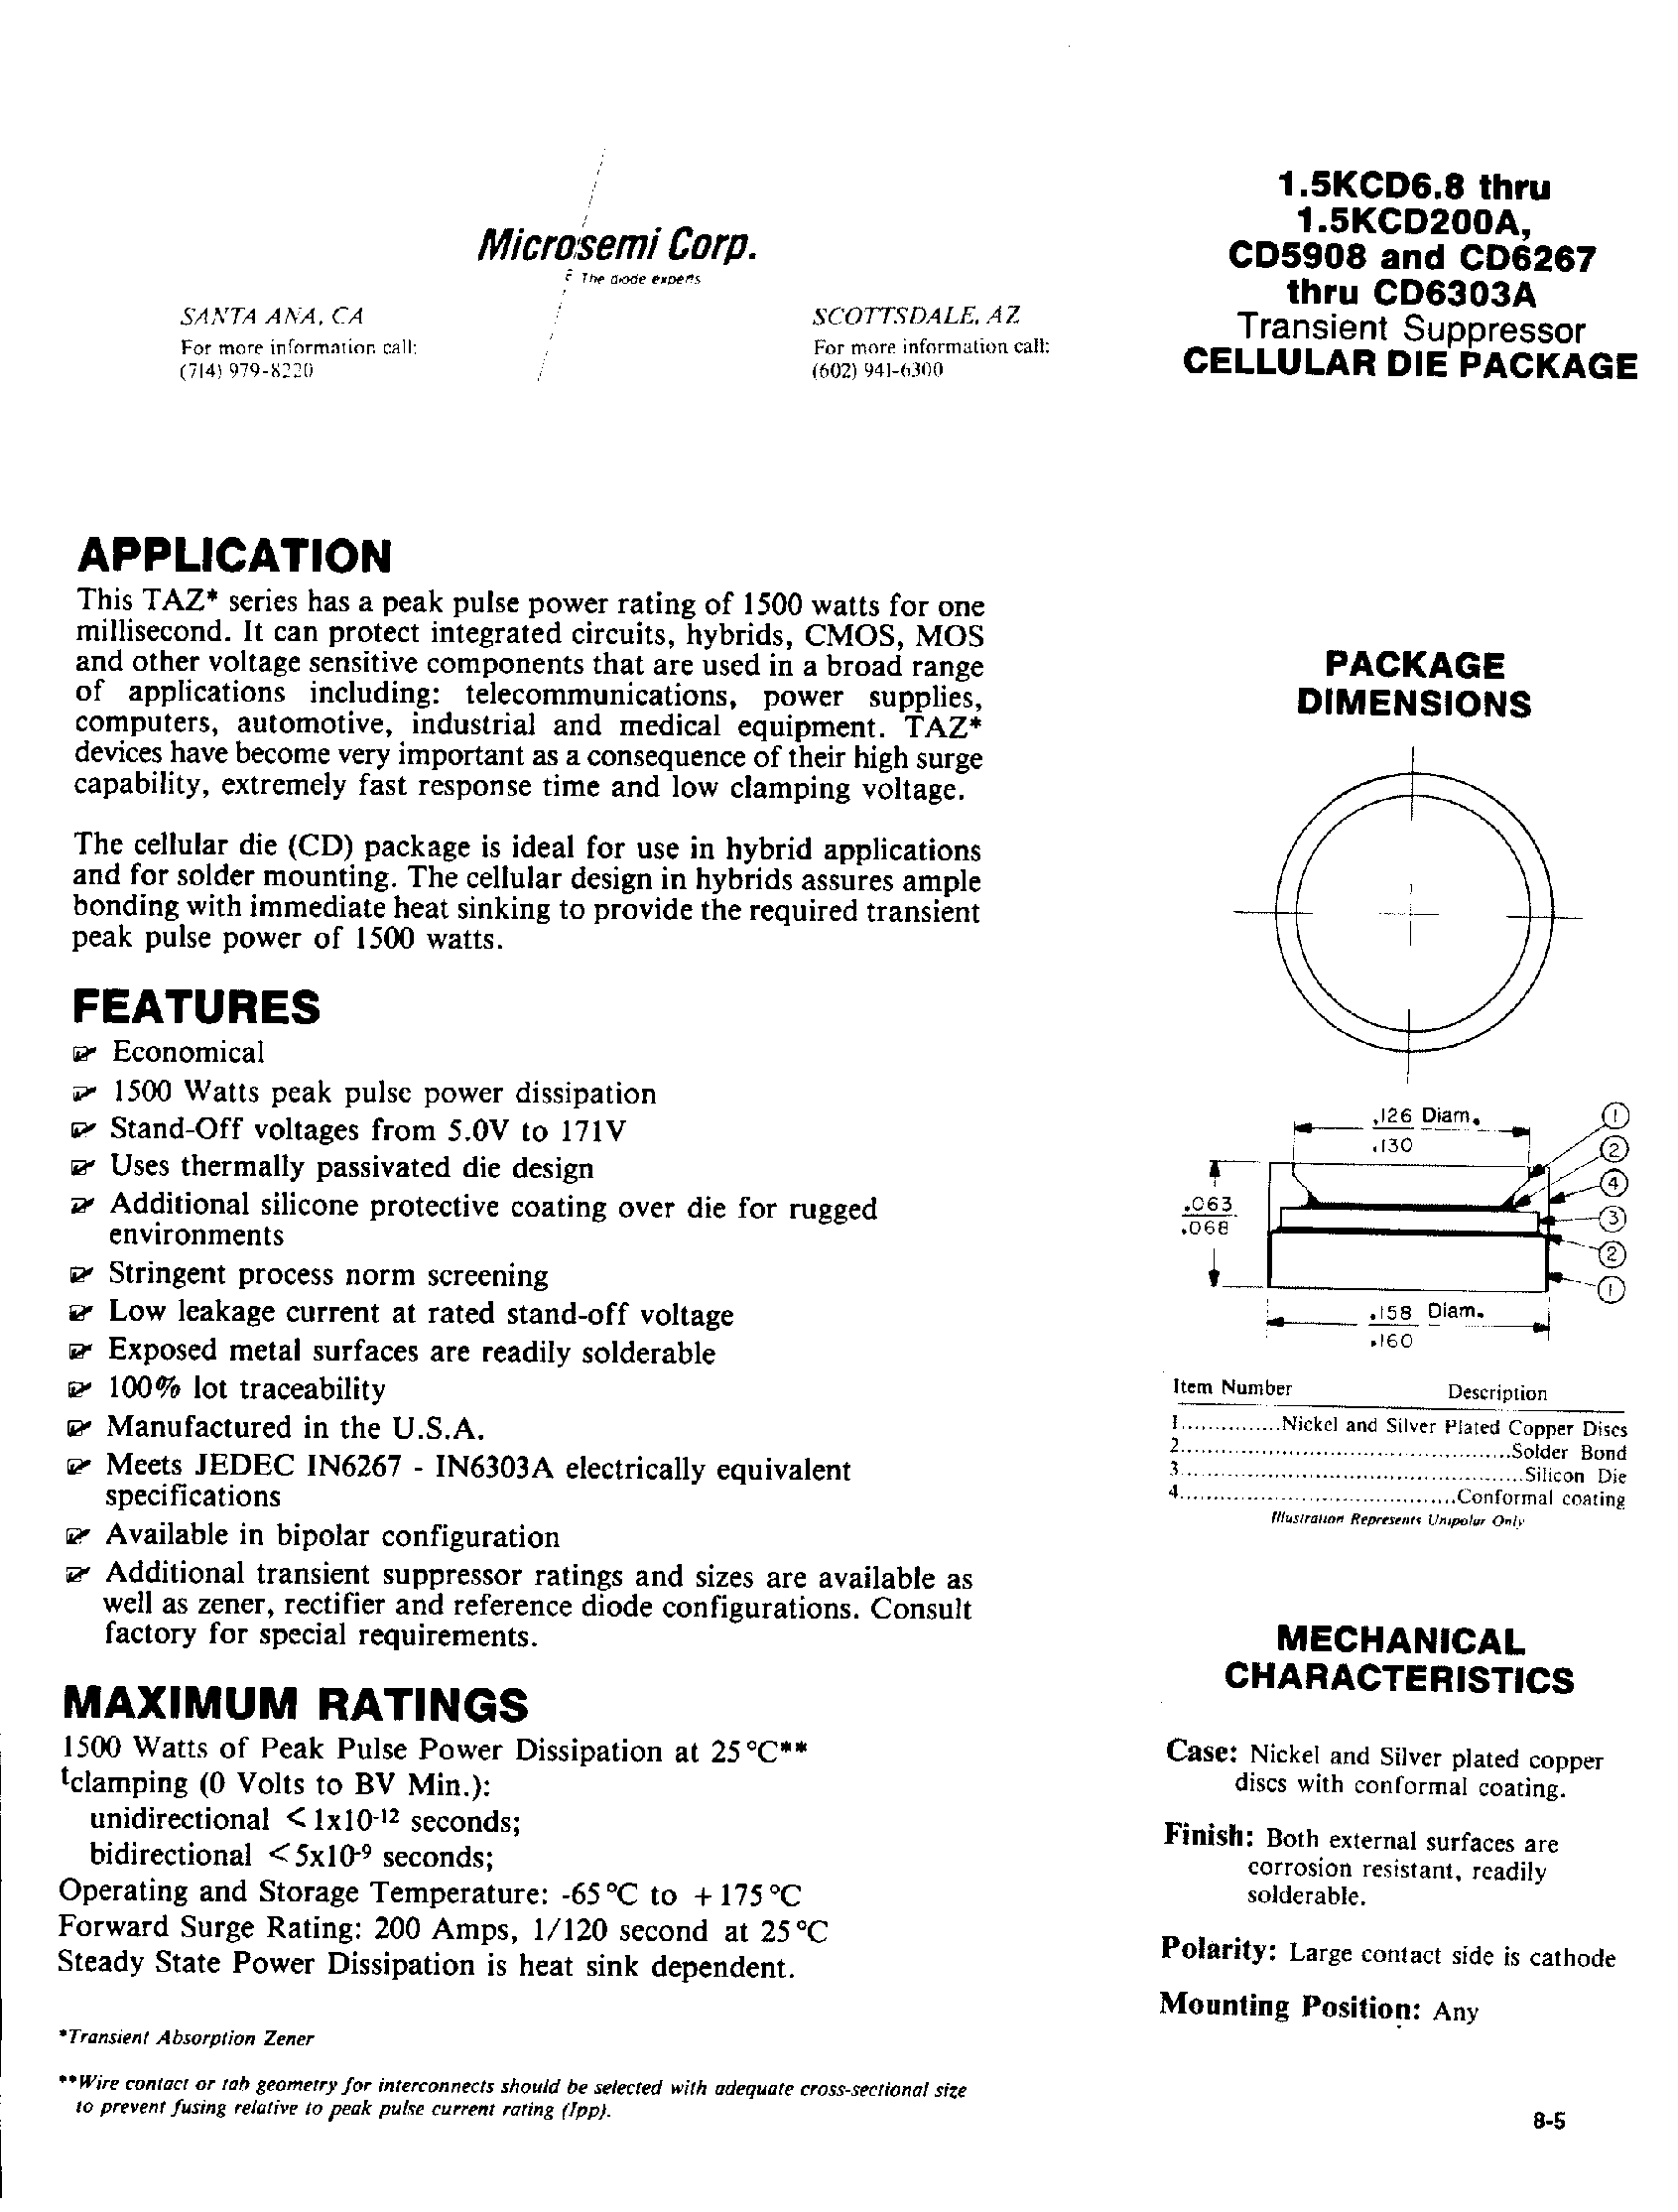 Datasheet CD6283A - Transient suppressor CELLULAR DIE PACKAGE page 1